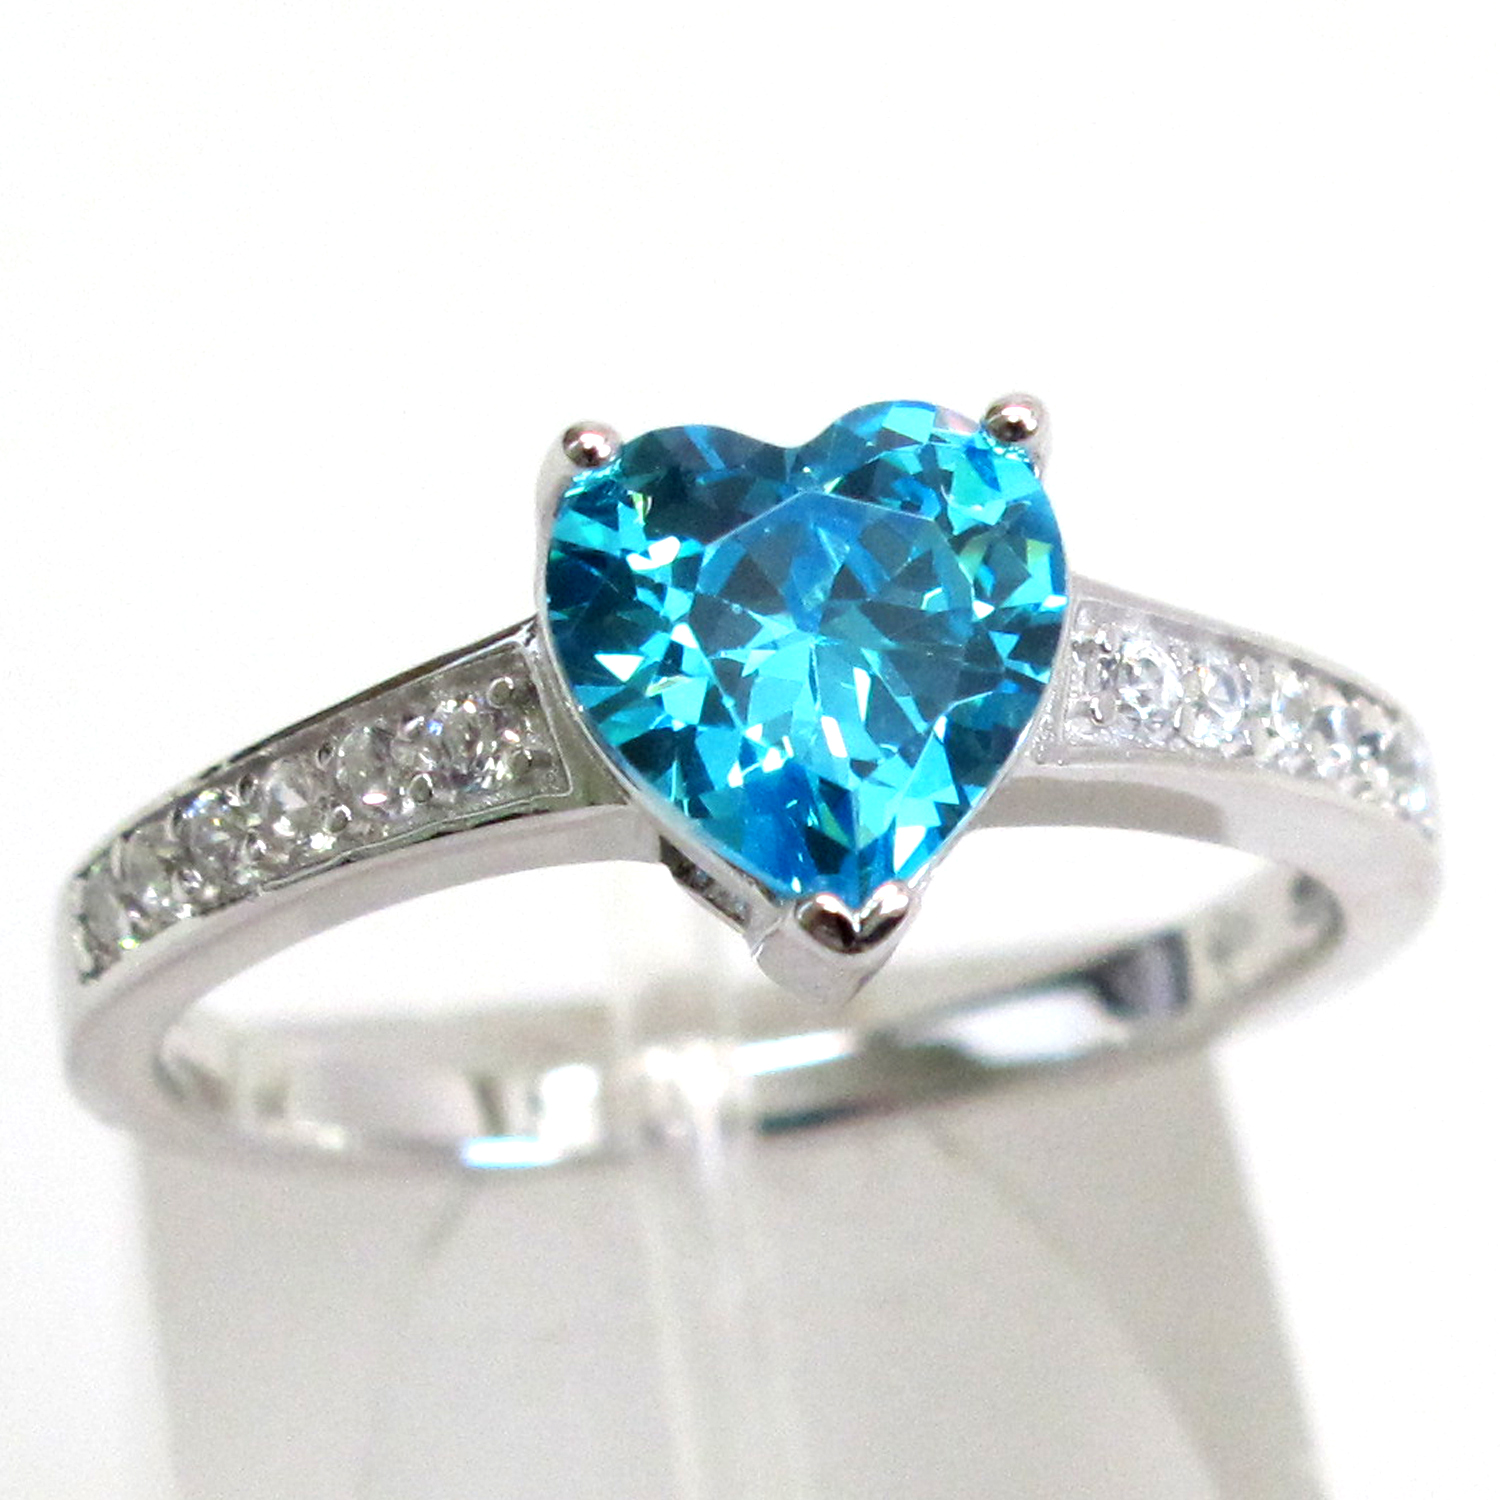 ALLURING 2 CT HEART CUT AQUAMARINE 925 STERLING SILVER RING SIZE 5-10